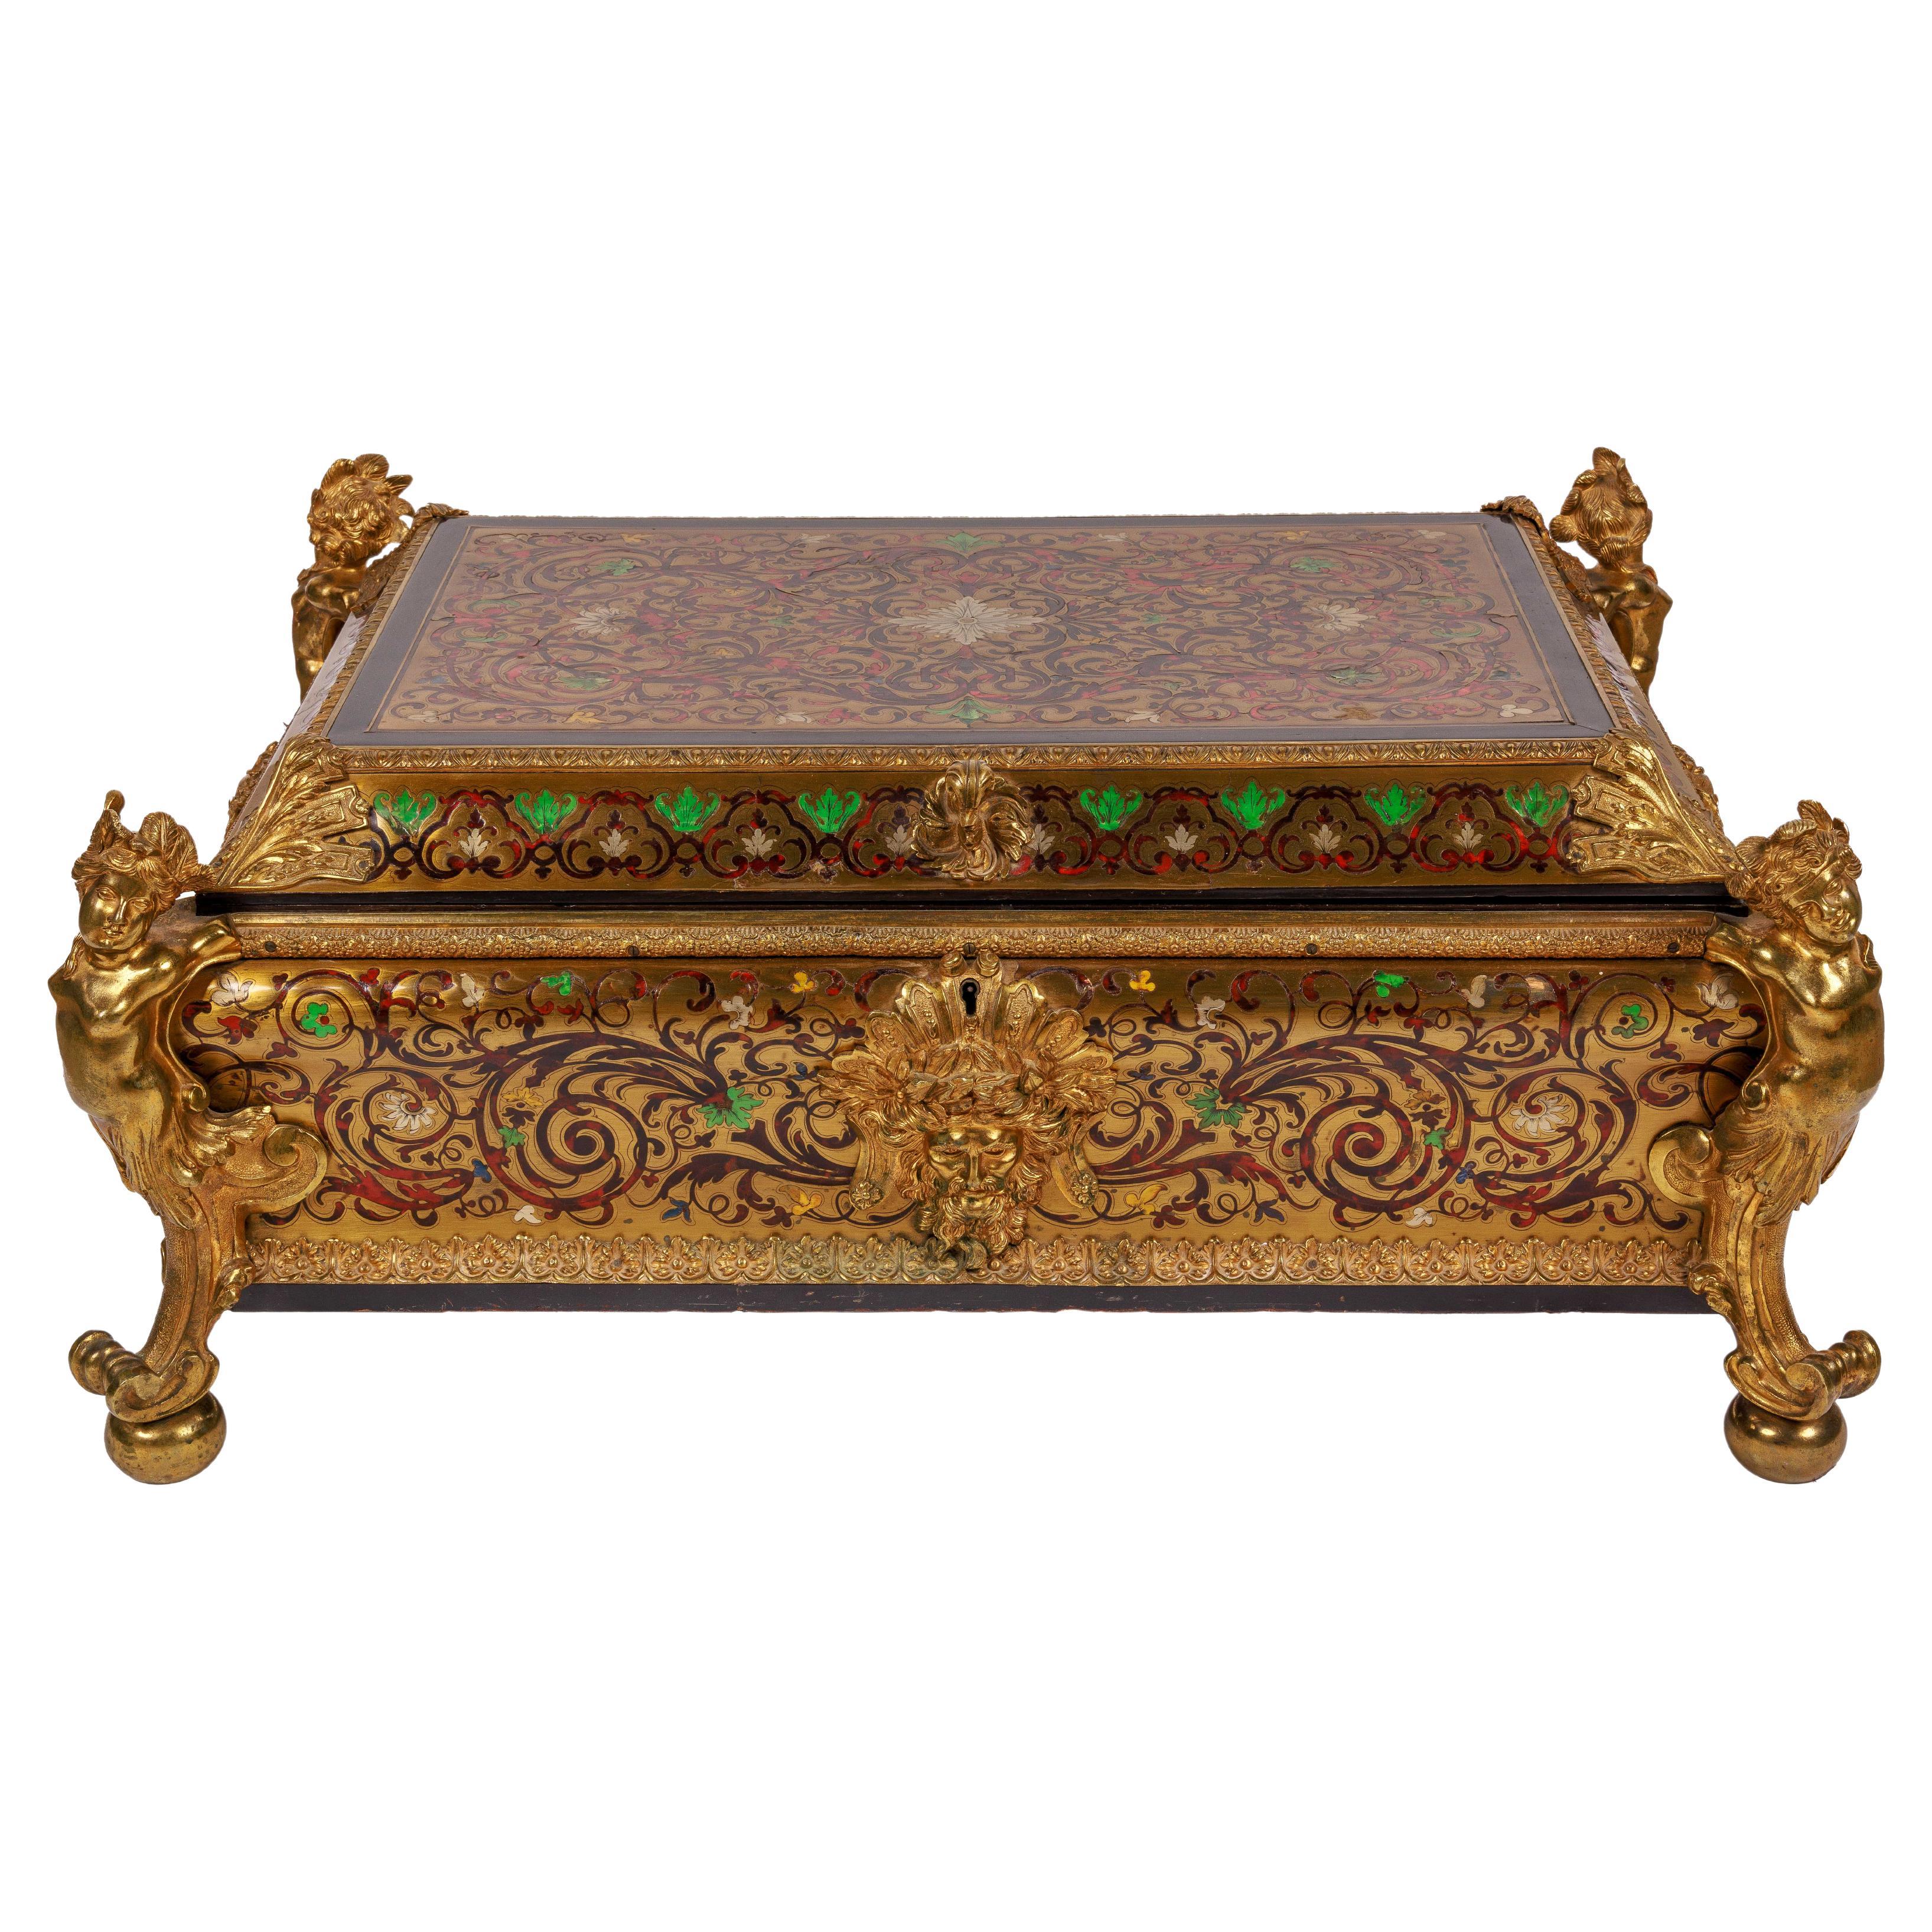 Monumental Louis XIV Style Gilt-Bronze Mounted Boulle Marquetry Casket Box